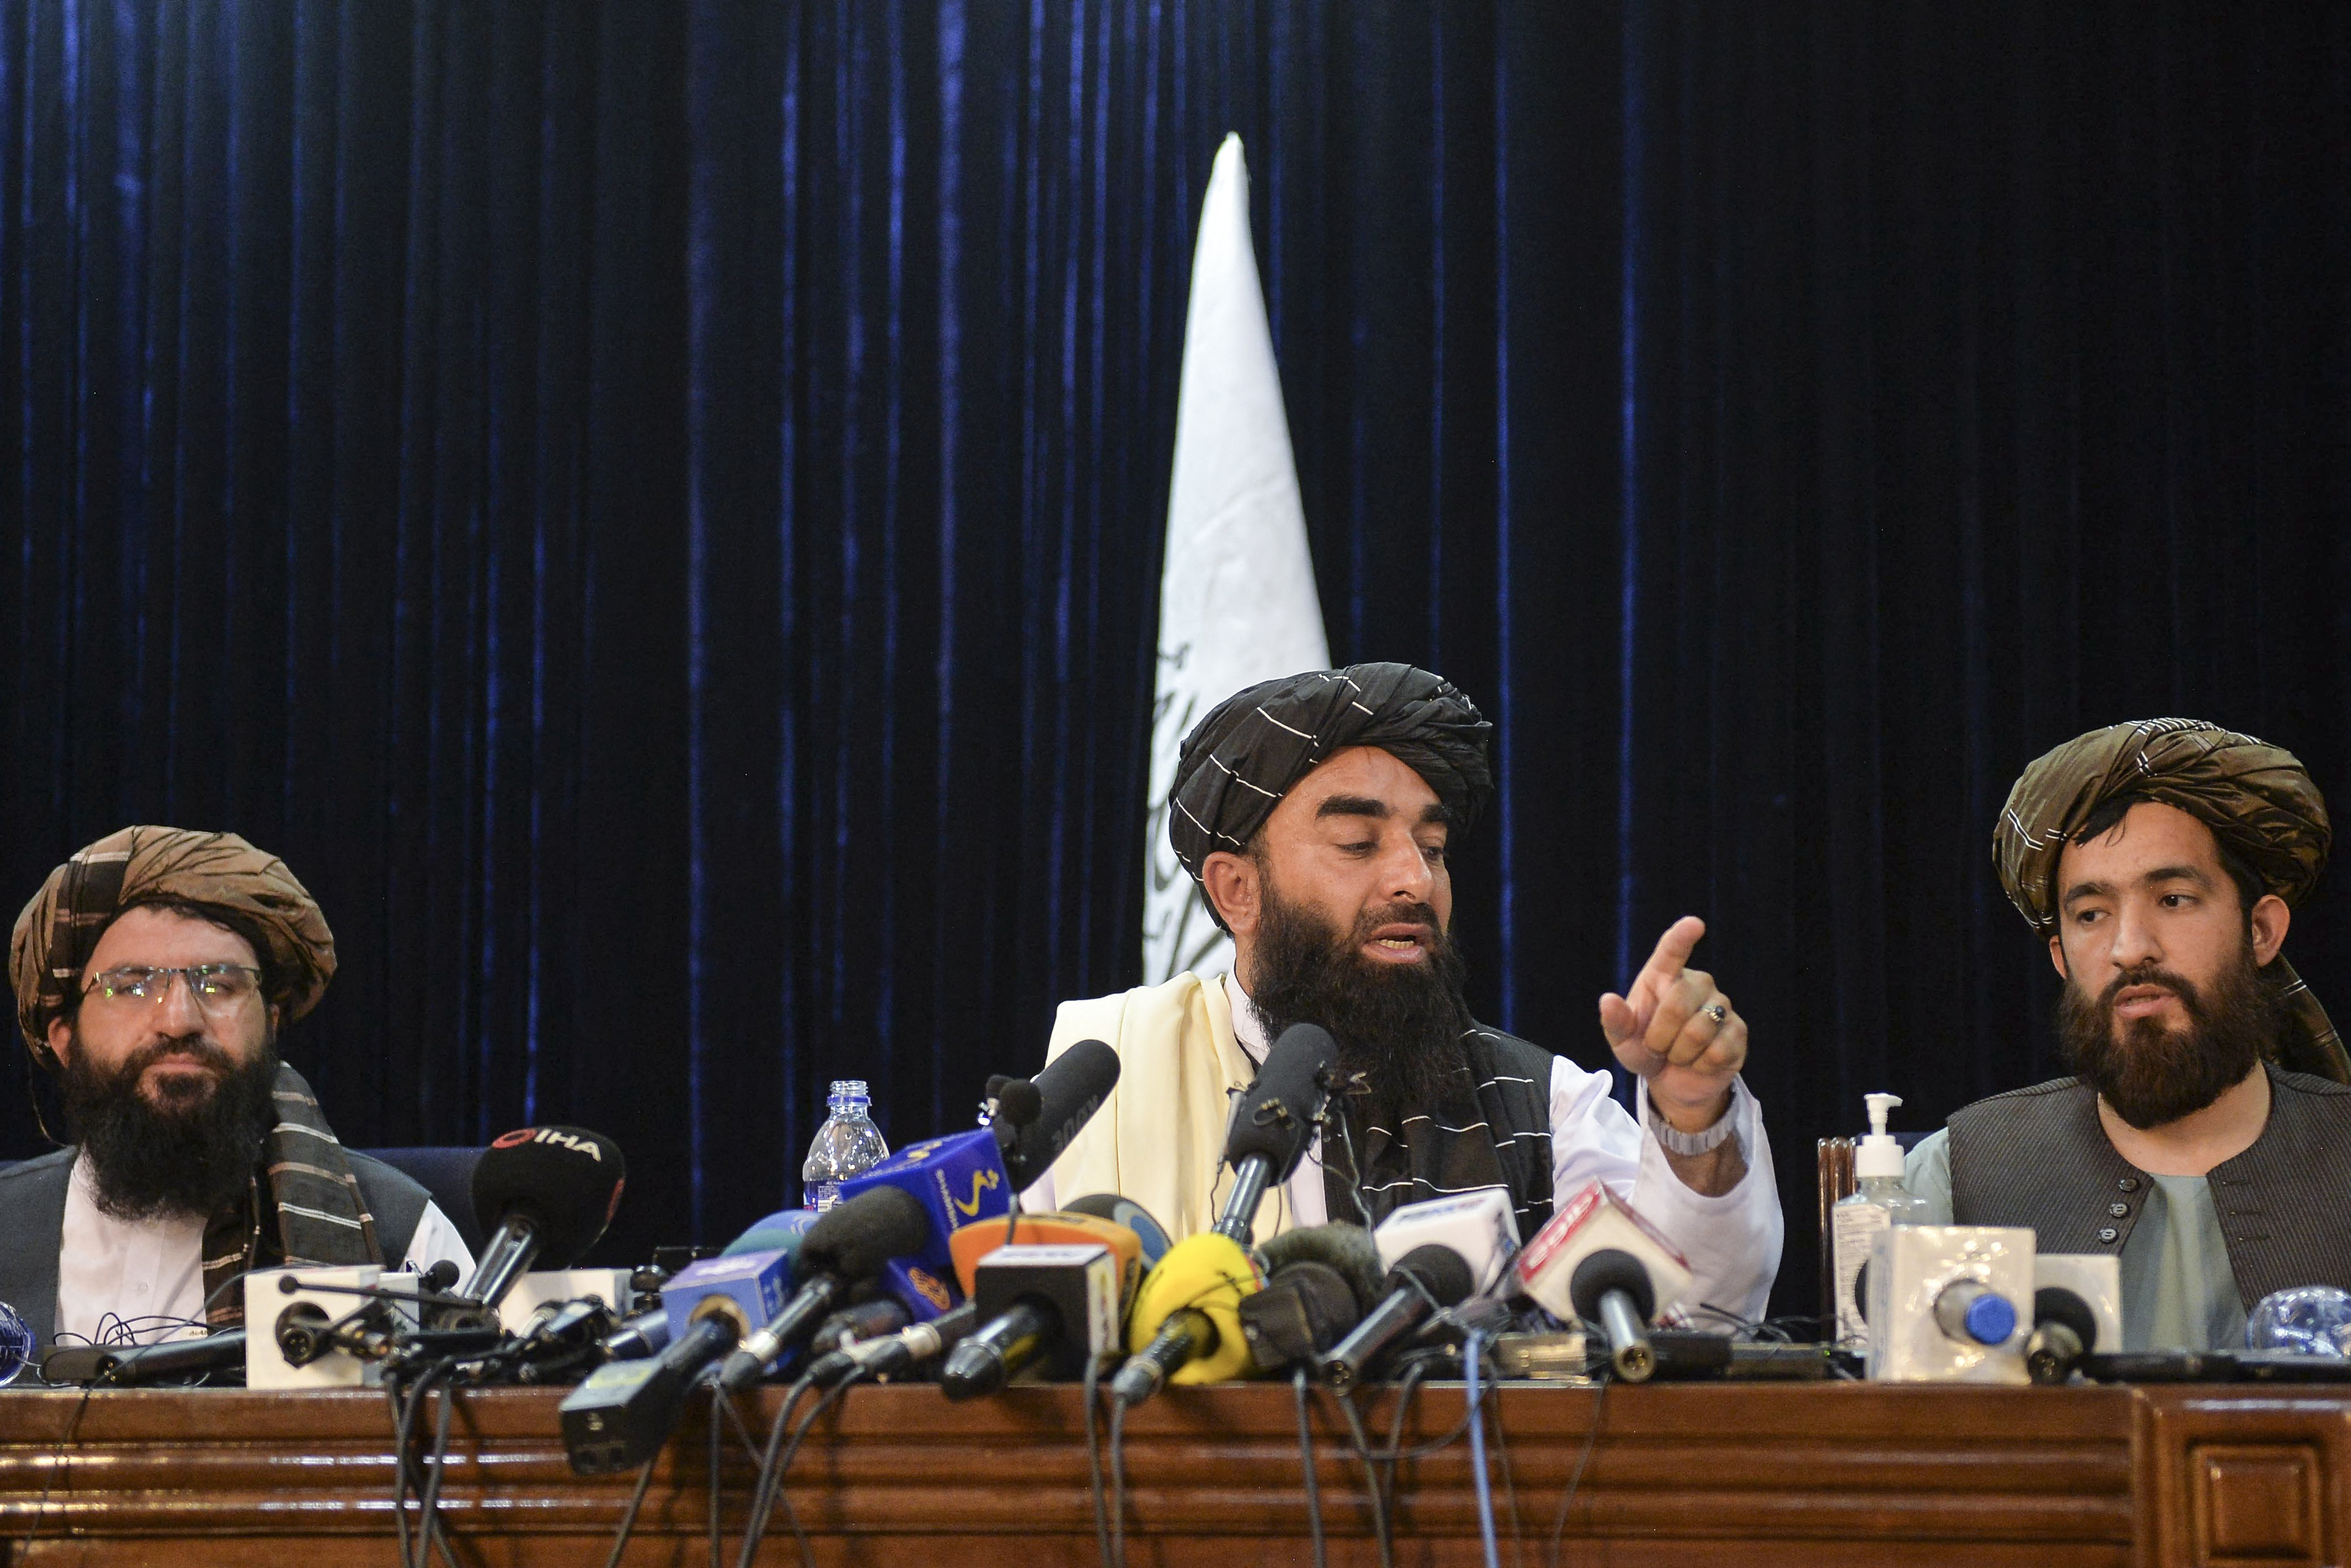 Taliban spokesperson Zabihullah Mujahid (C) gestures as he addresses the first press conference in Kabul on August 17, 2021 following the Taliban stunning takeover of Afghanistan. (Photo by Hoshang Hashimi / AFP)